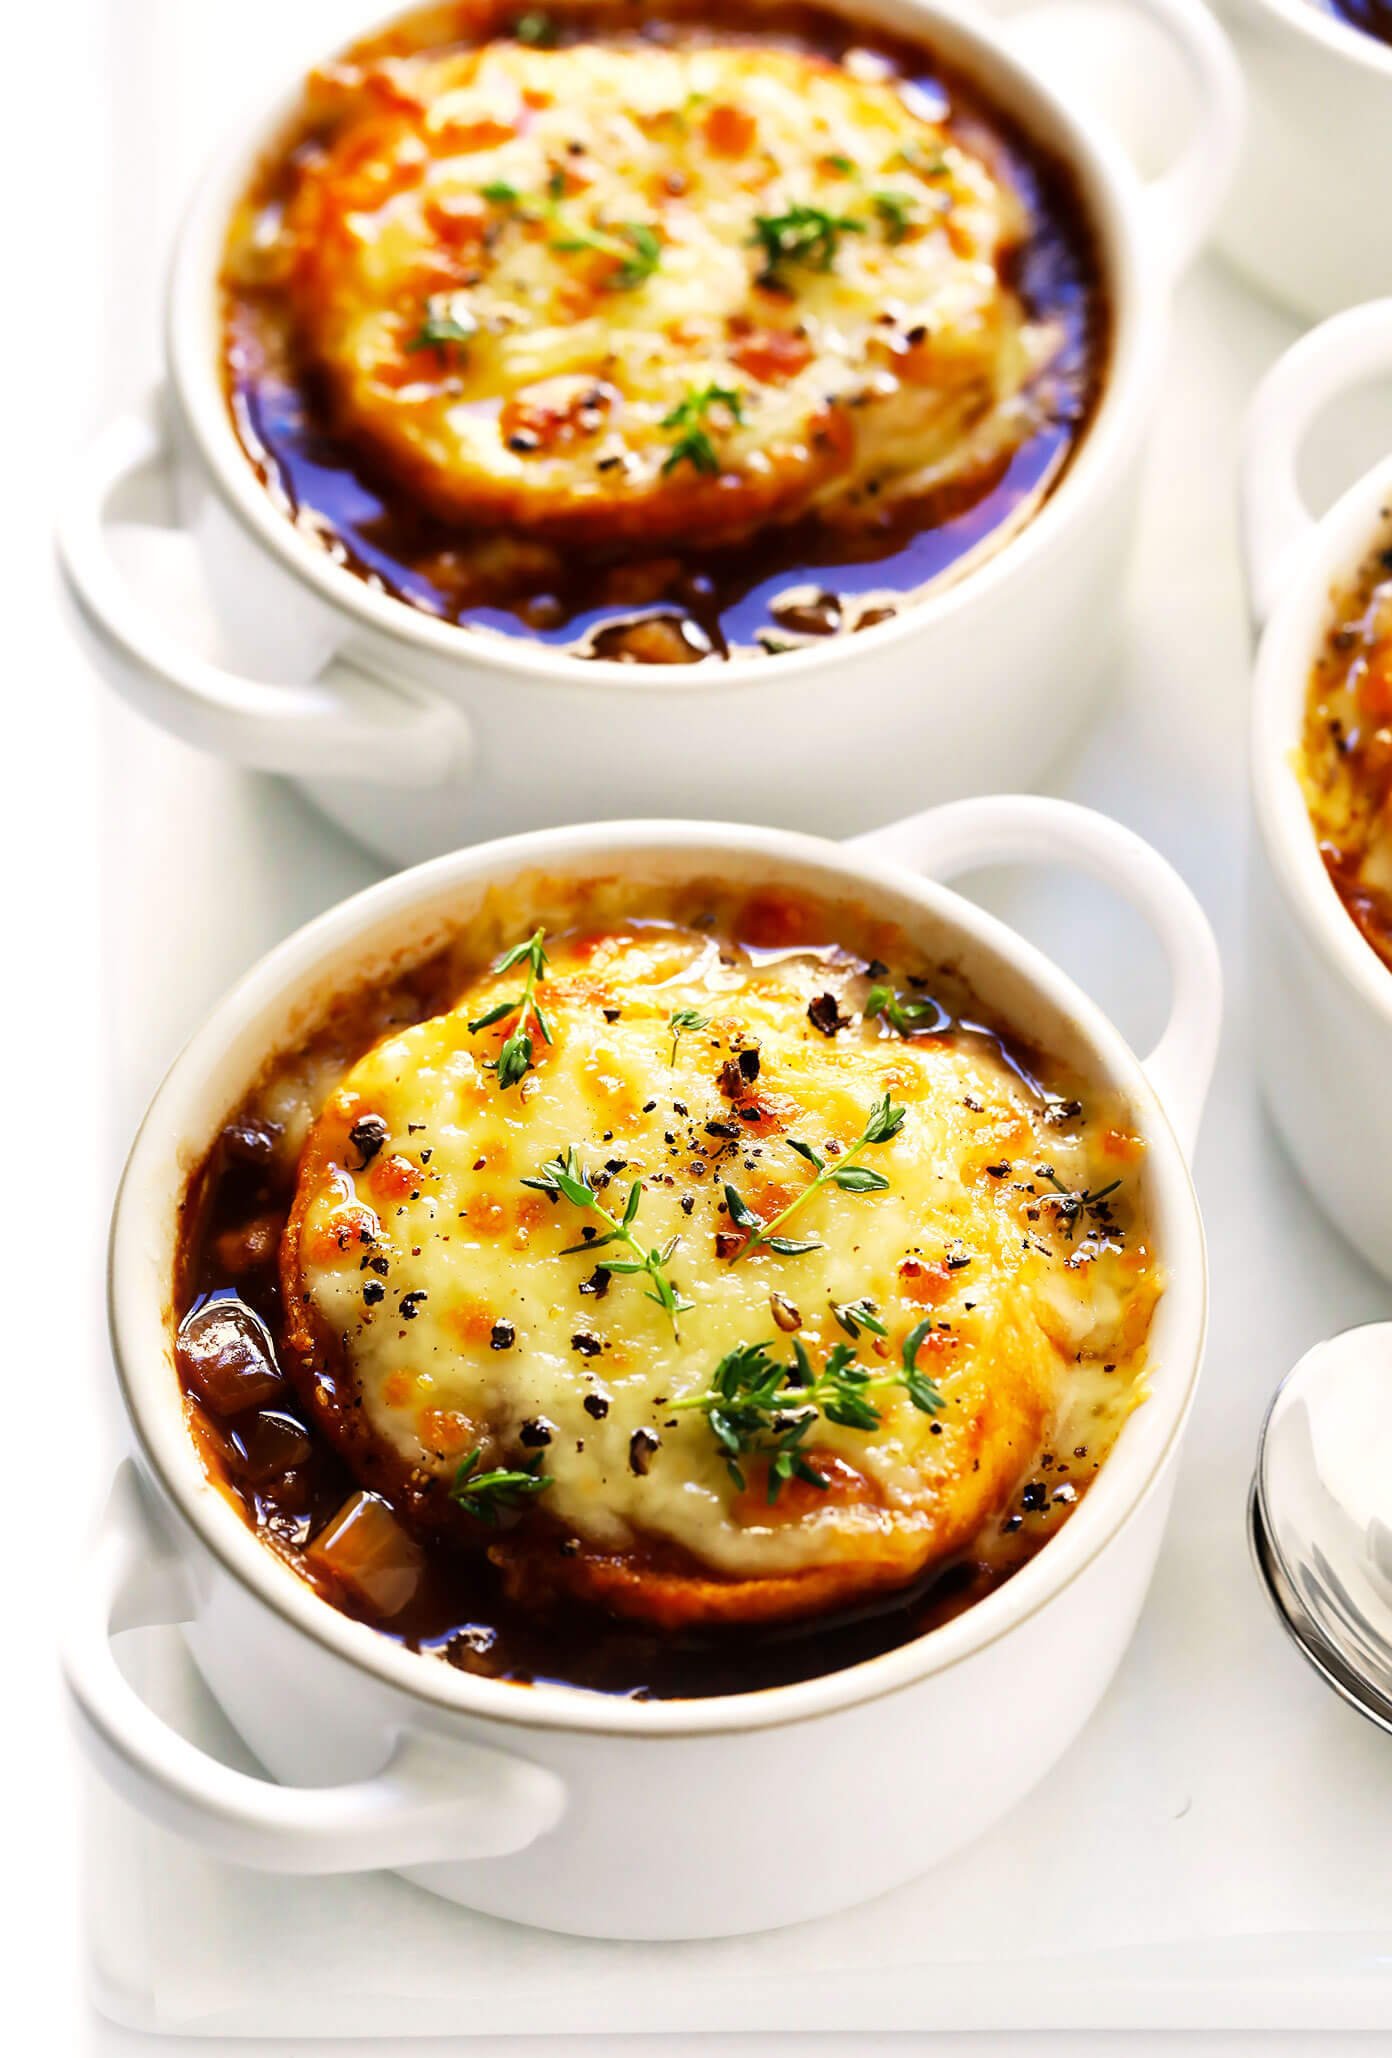 French Onion Soup in Bowls with Melted Cheese and Thyme